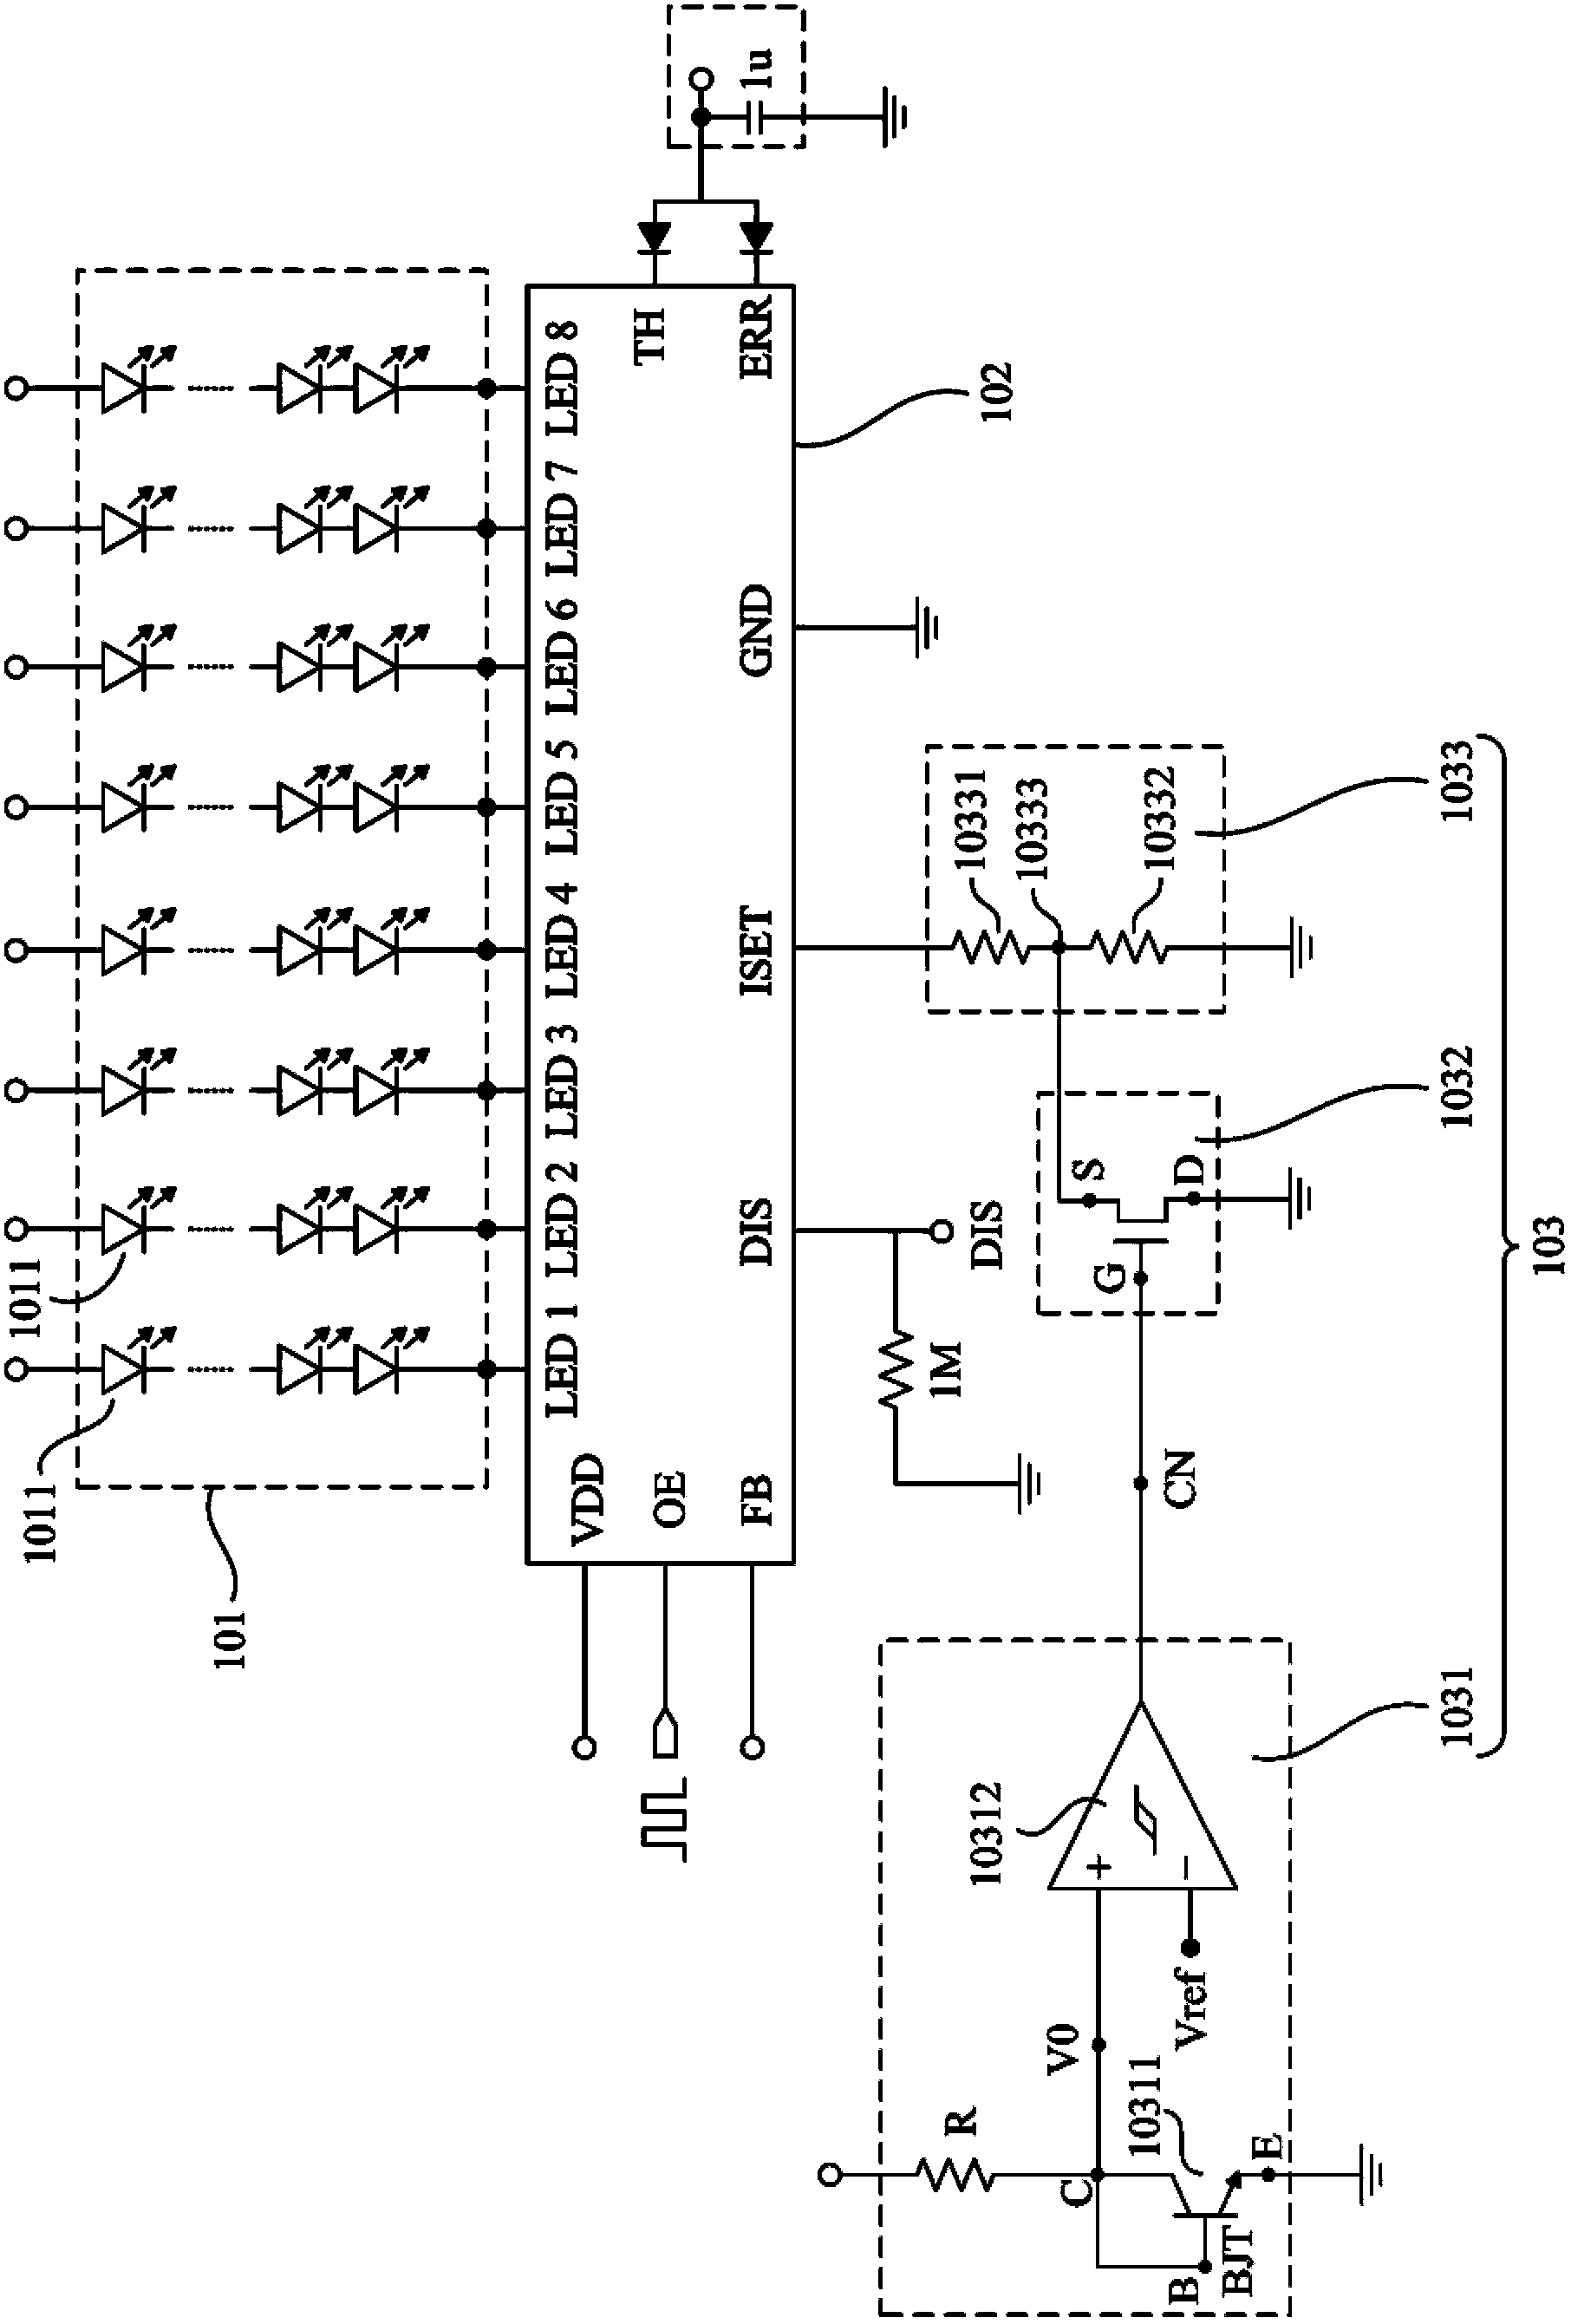 Driving current control circuit and operating method thereof